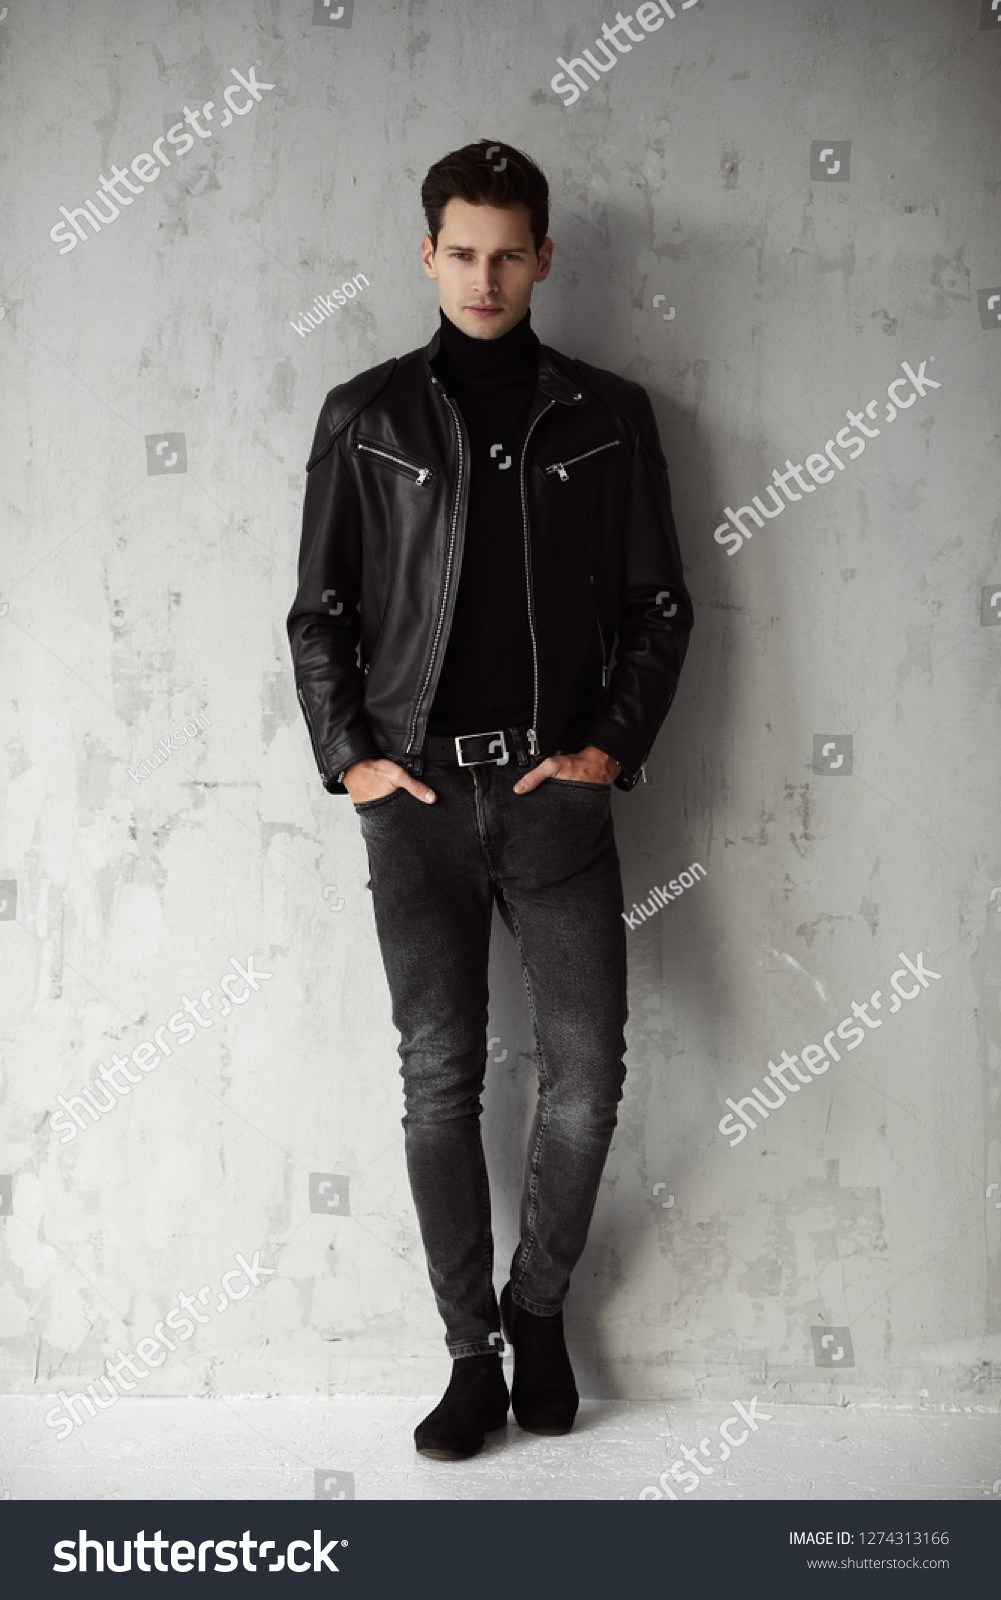 man in black outfit